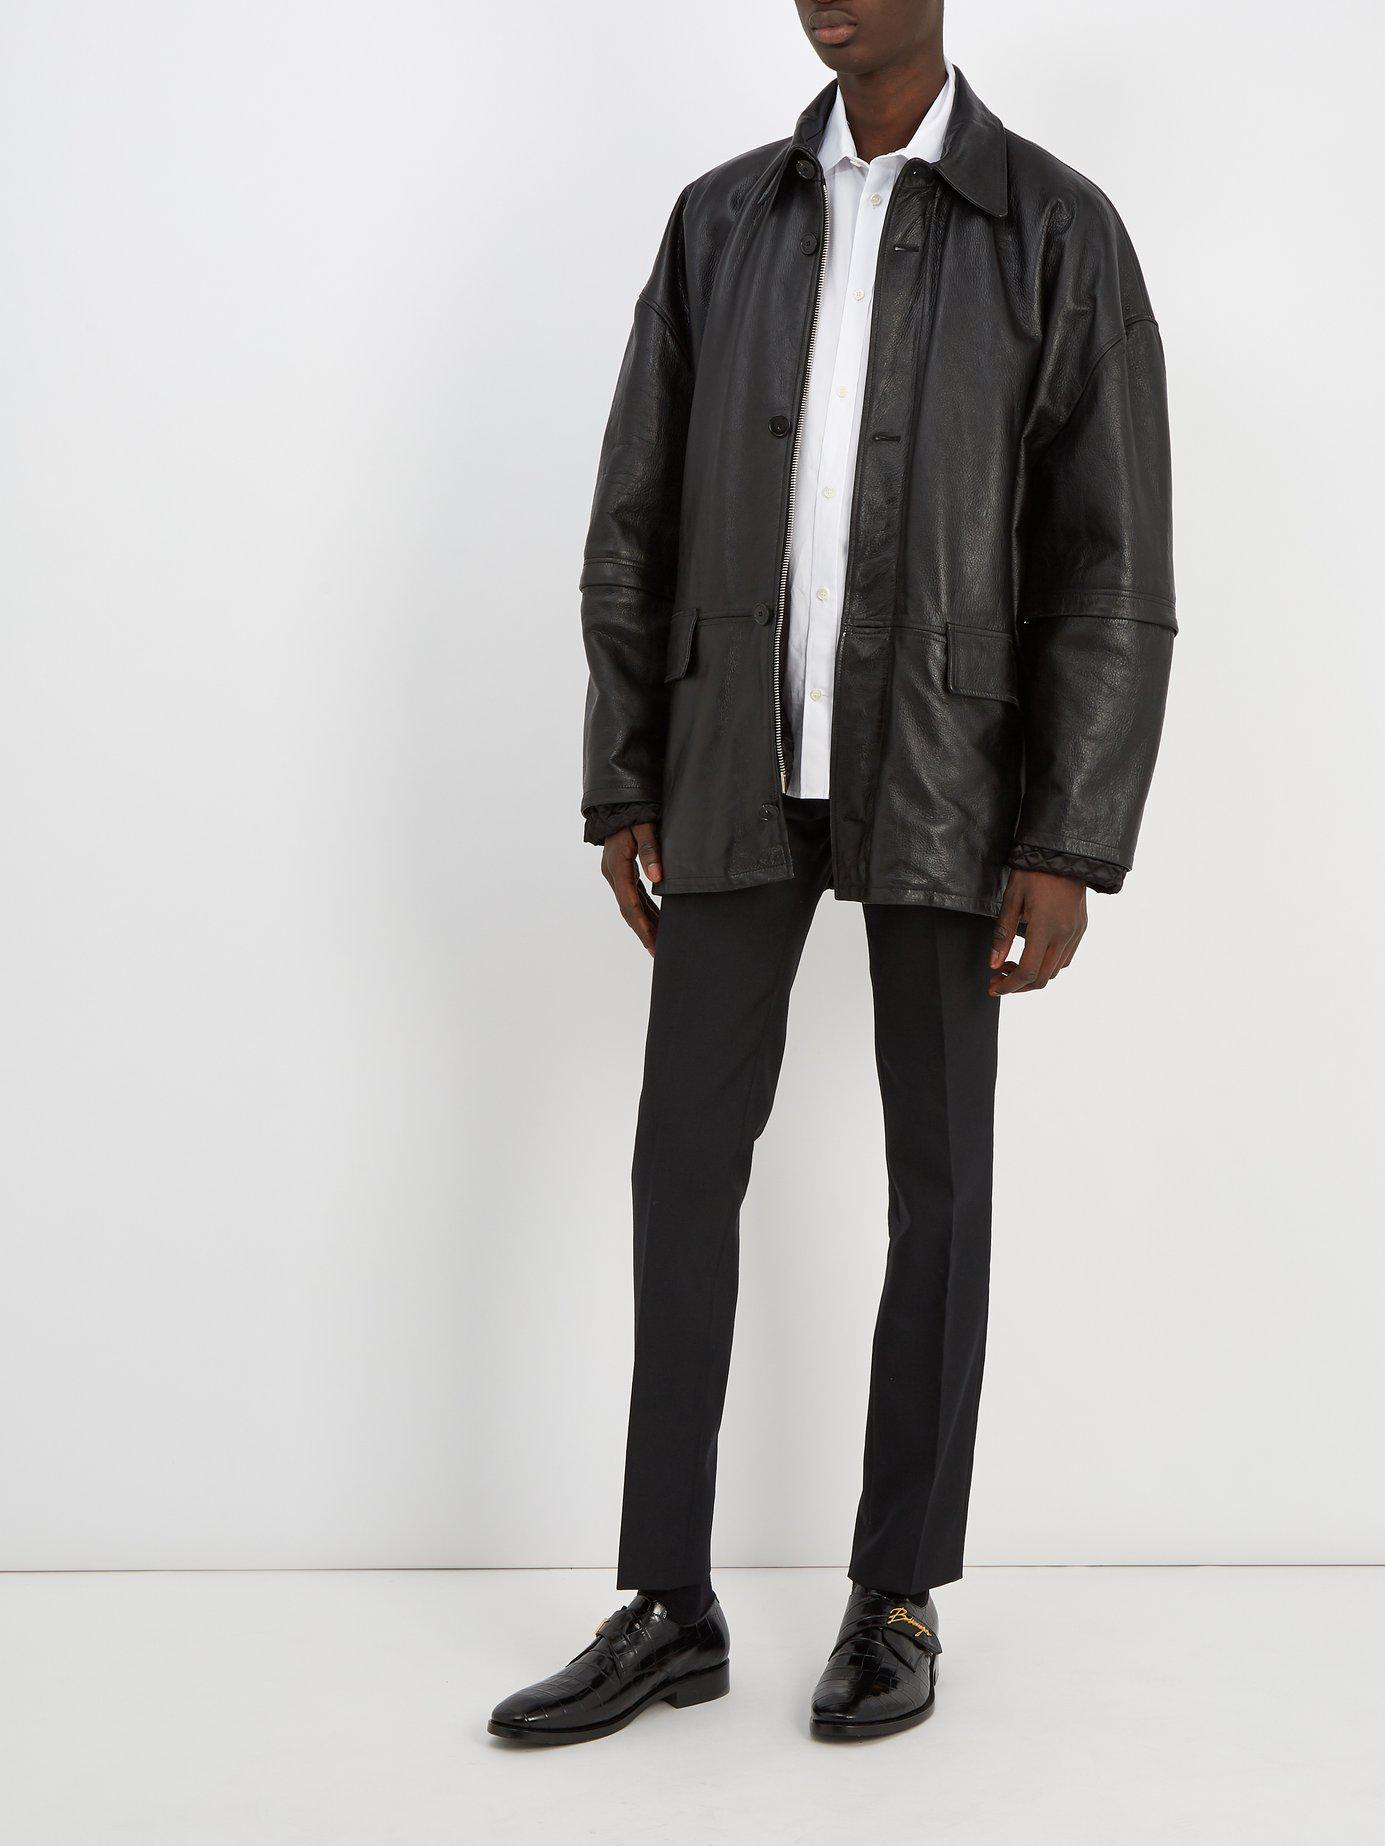 Balenciaga Oversized Leather Jacket in Black for Men - Lyst